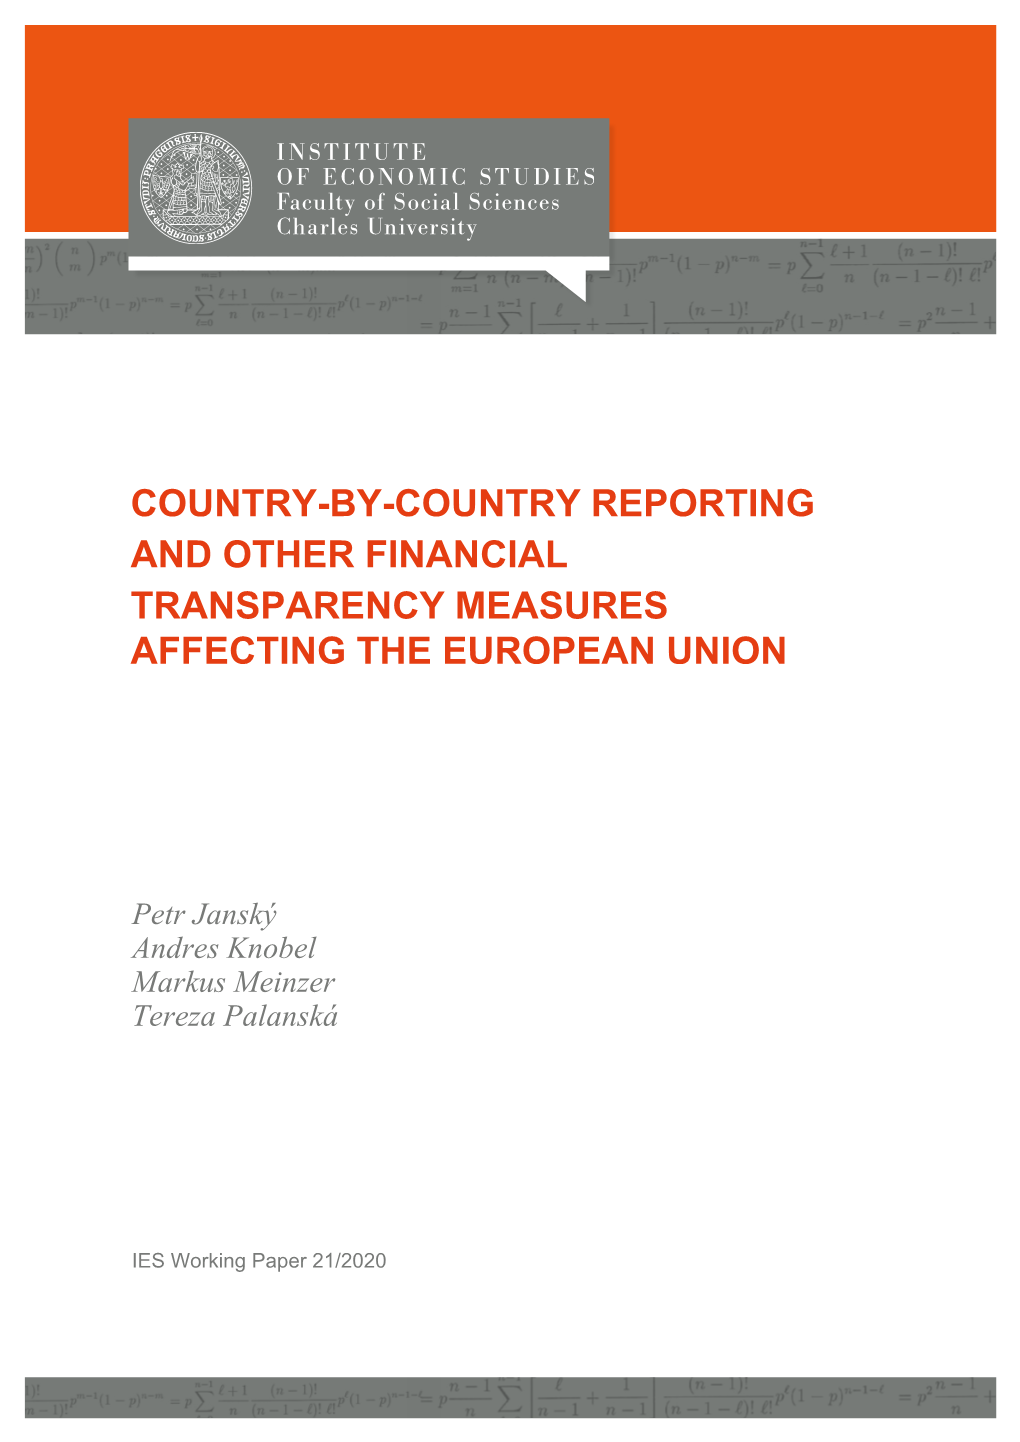 Country-By-Country Reporting and Other Financial Transparency Measures Affecting the European Union" IES Working Papers 21/2020